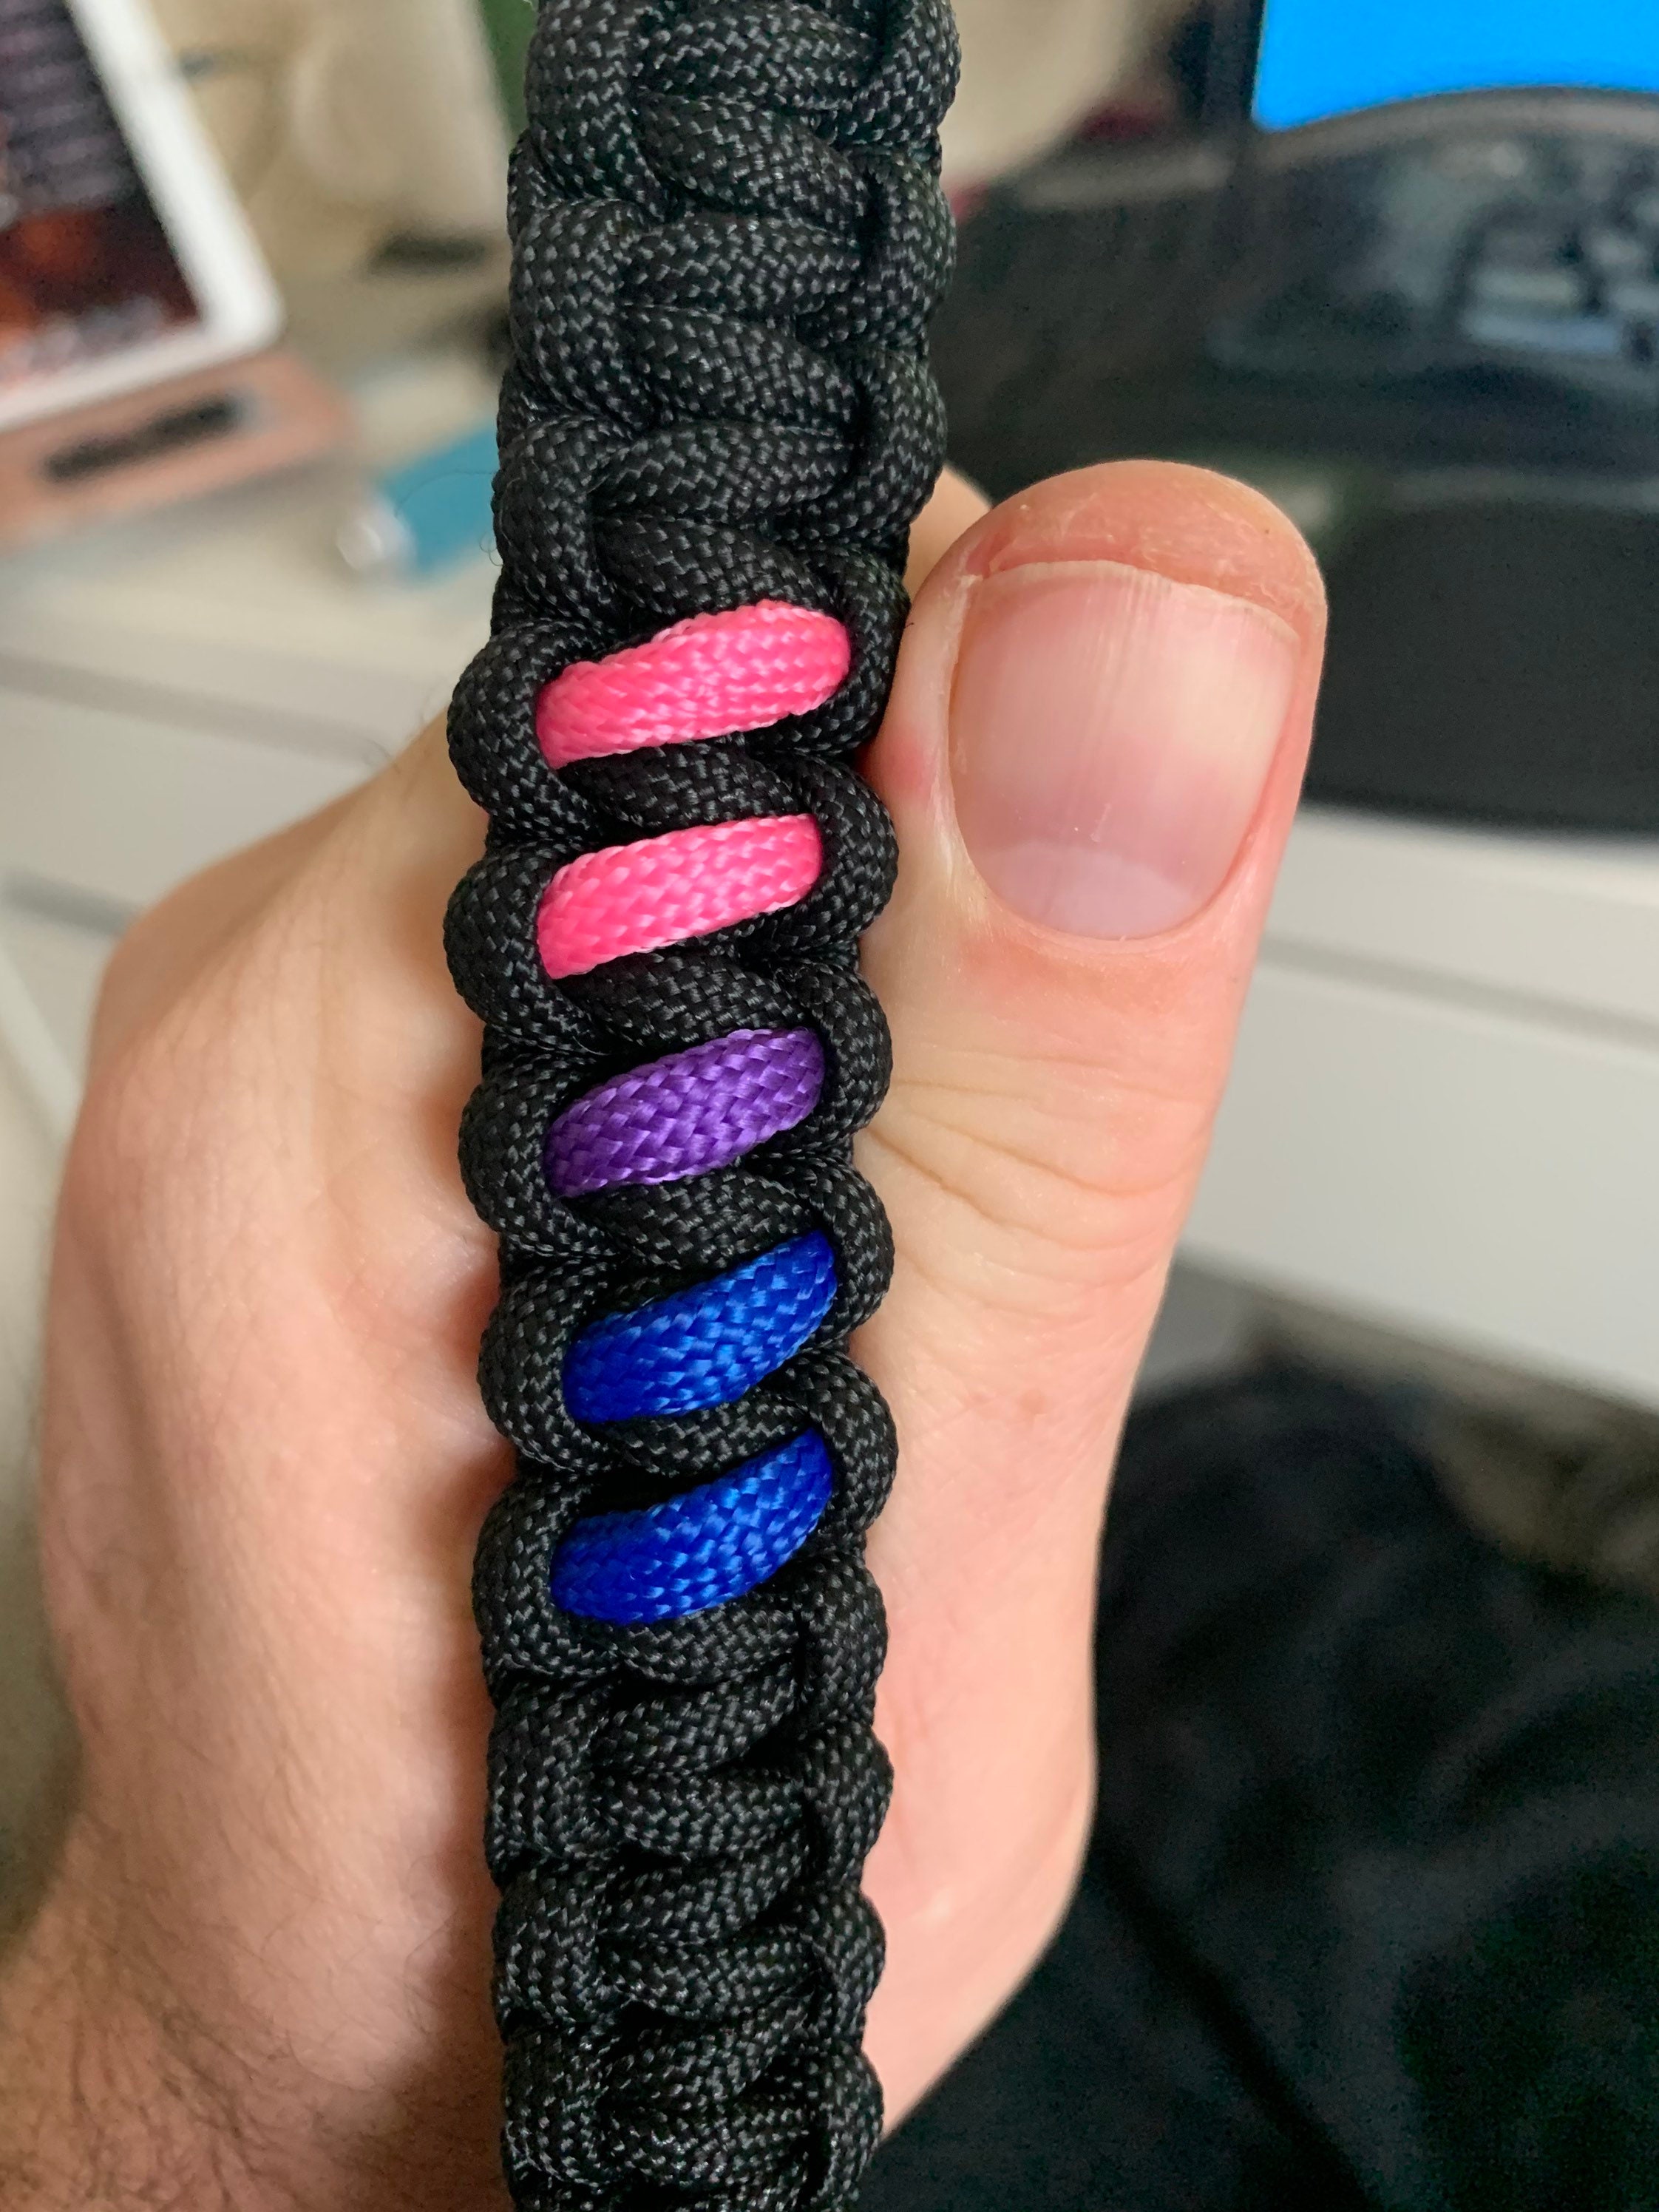 My bisexual pride paracord bracelet. First time making paracord accessories,  I hope to make a collar or other things in the future. A pineapple charm  because my wife and I love pineapples. 